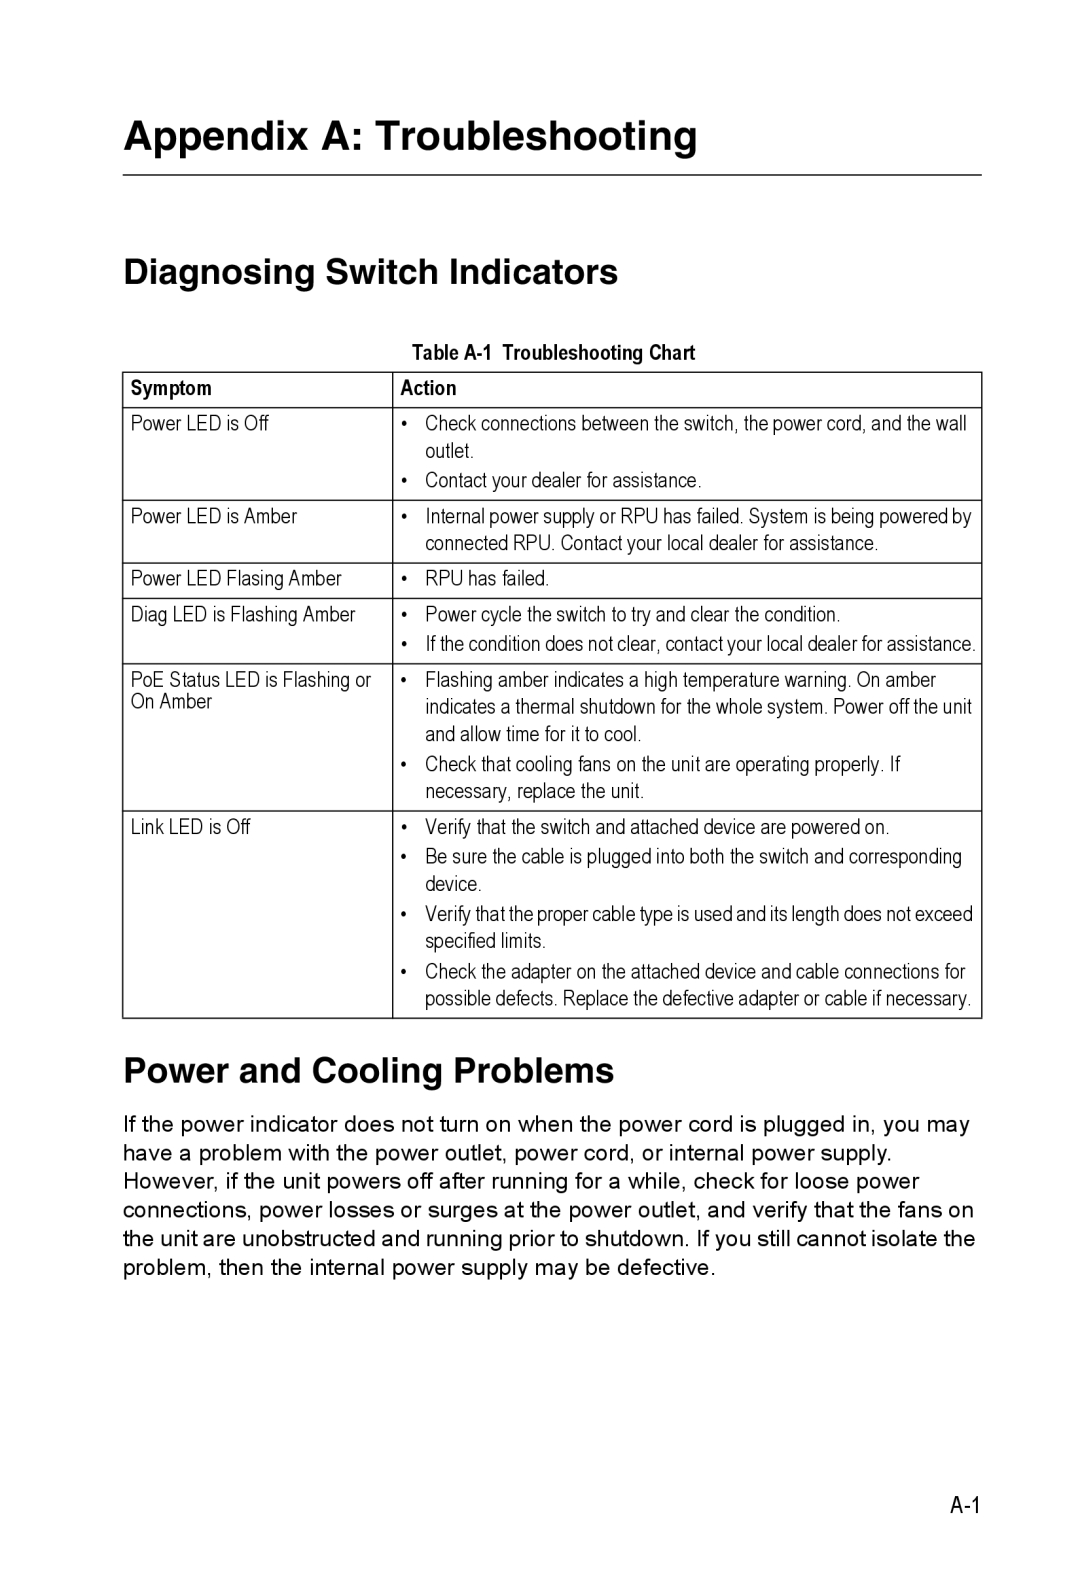 SMC Networks SMC8126PL2-F Appendix A Troubleshooting, Diagnosing Switch Indicators, Power and Cooling Problems, Symptom 